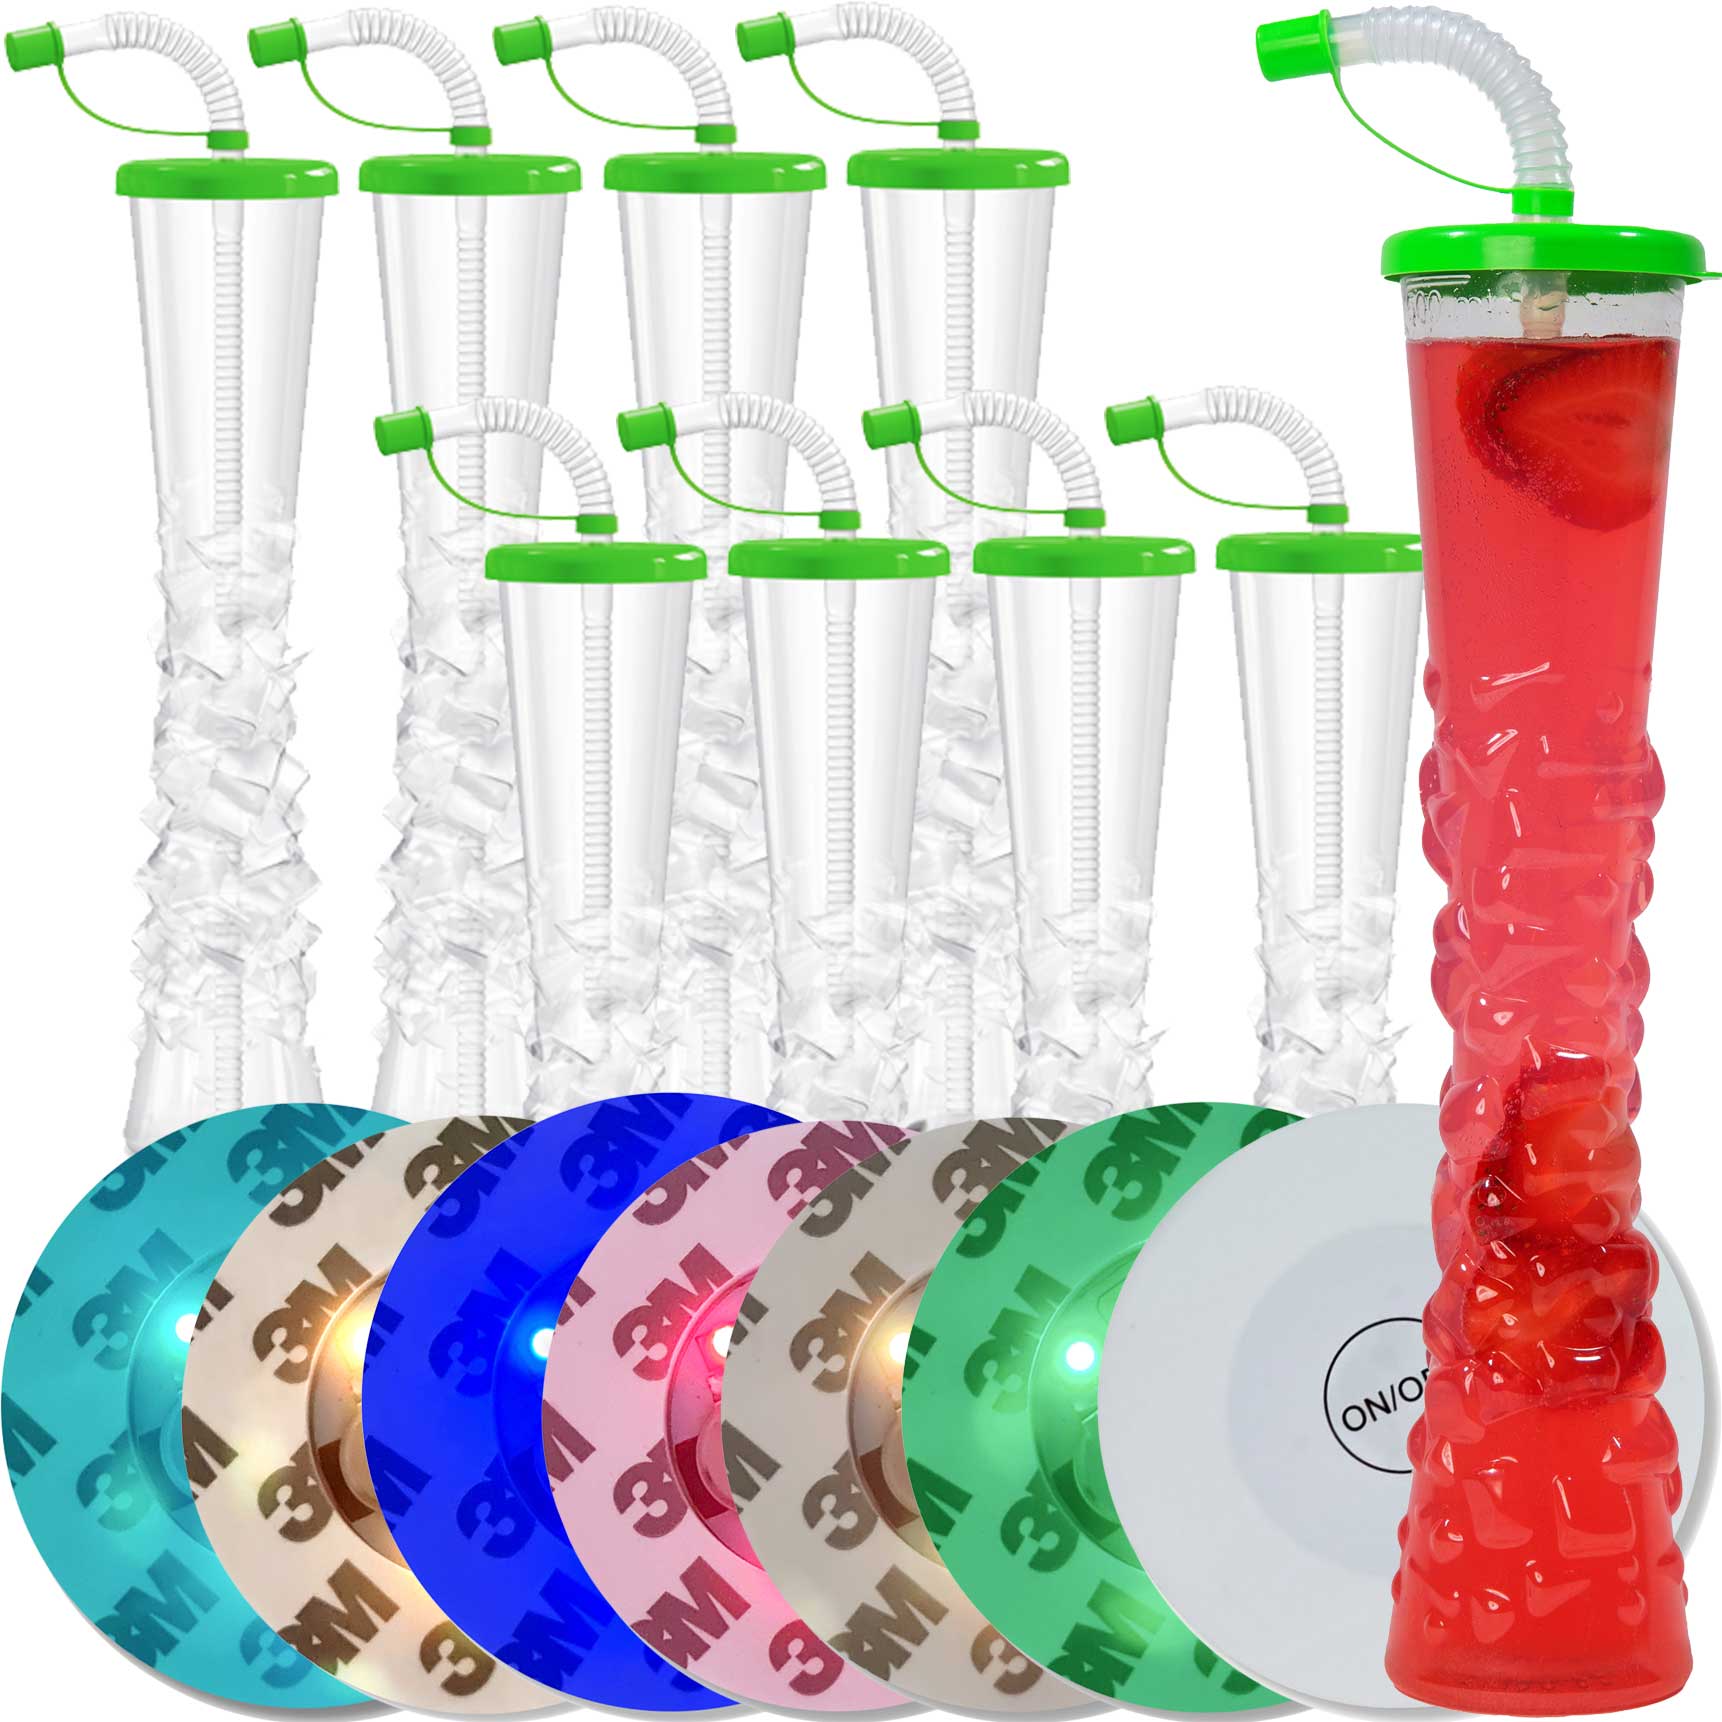 Sweet World USA Yard Cups Ice Yard Cups with LED Coasters (54 Cups - Lime) - for Frozen Drinks, Kids Parties - 17oz. (500ml) cups with lids and straws